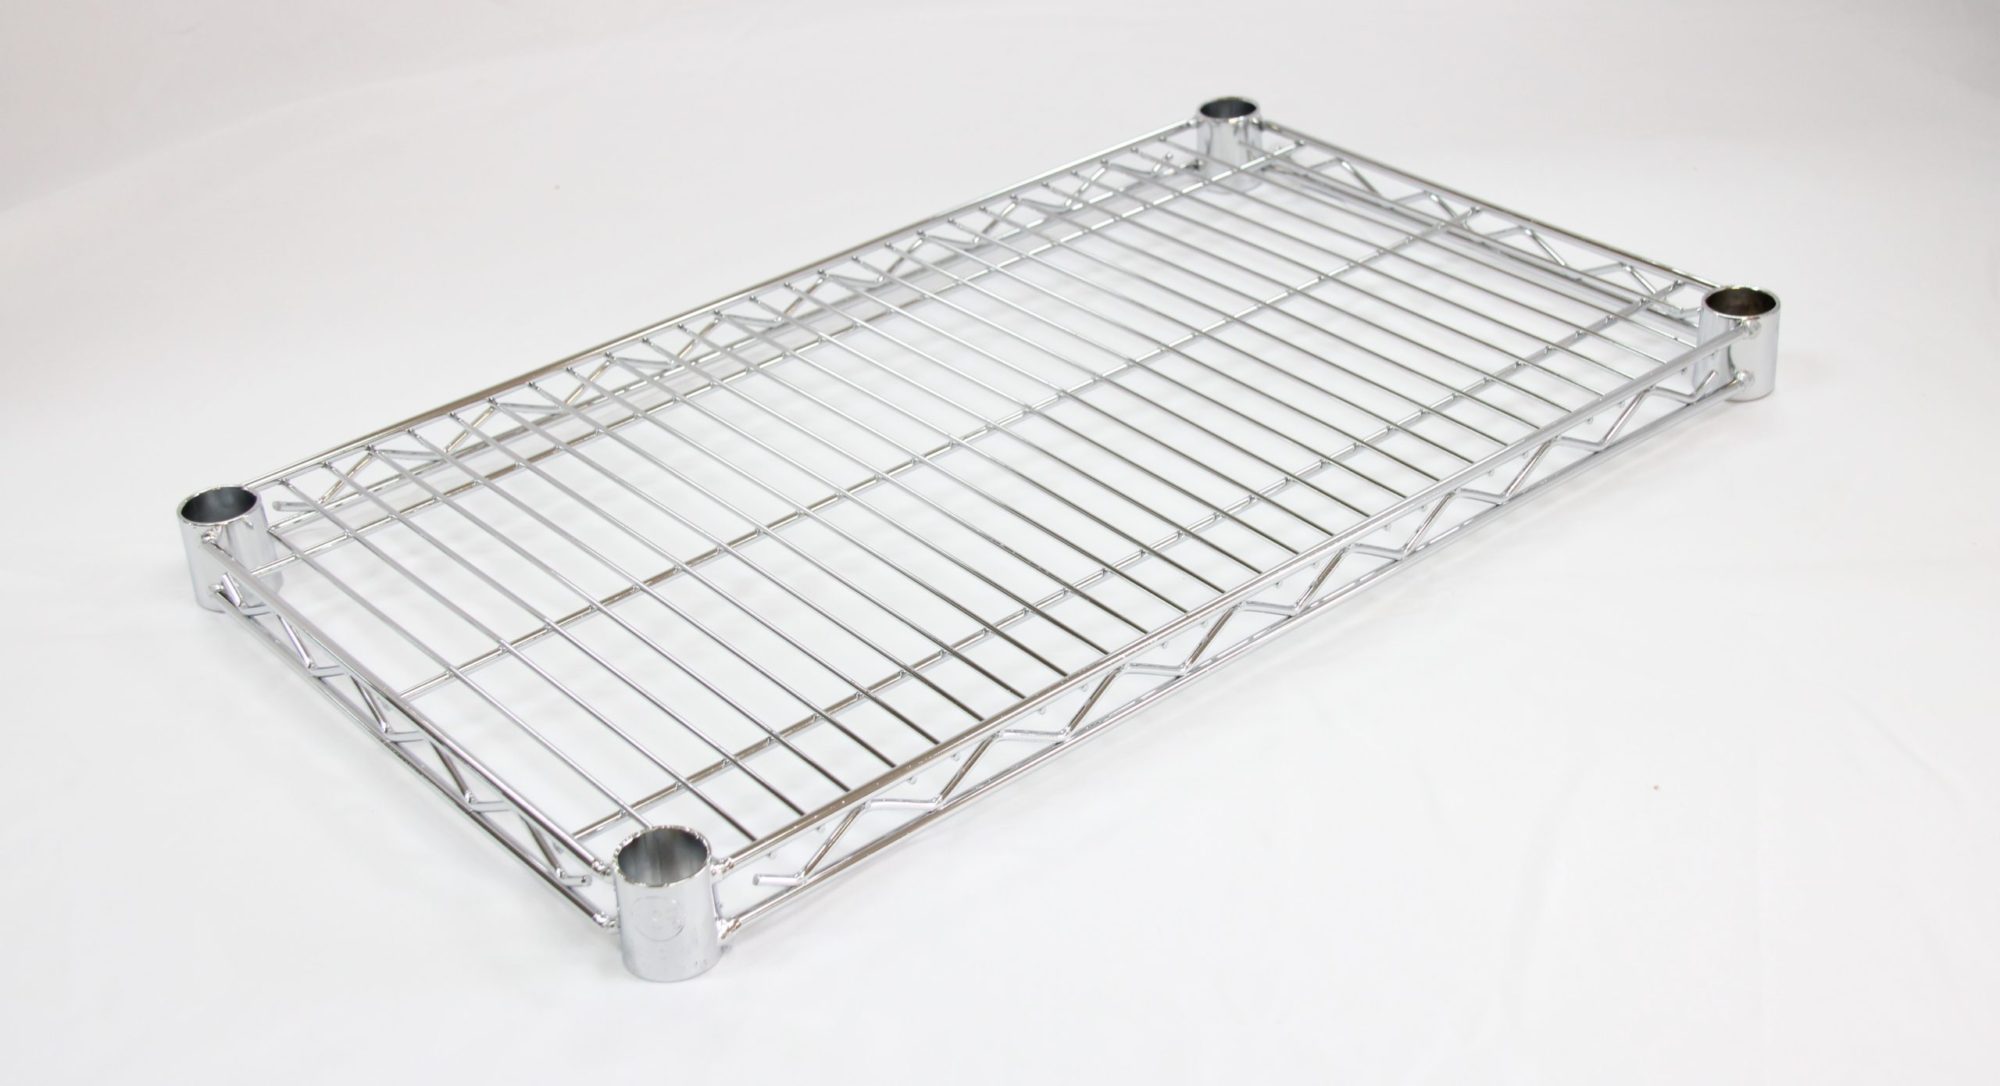 Omcan Wire Mesh Shelving 14" x 60" 20104 Chrome 2 Pack-S1460C